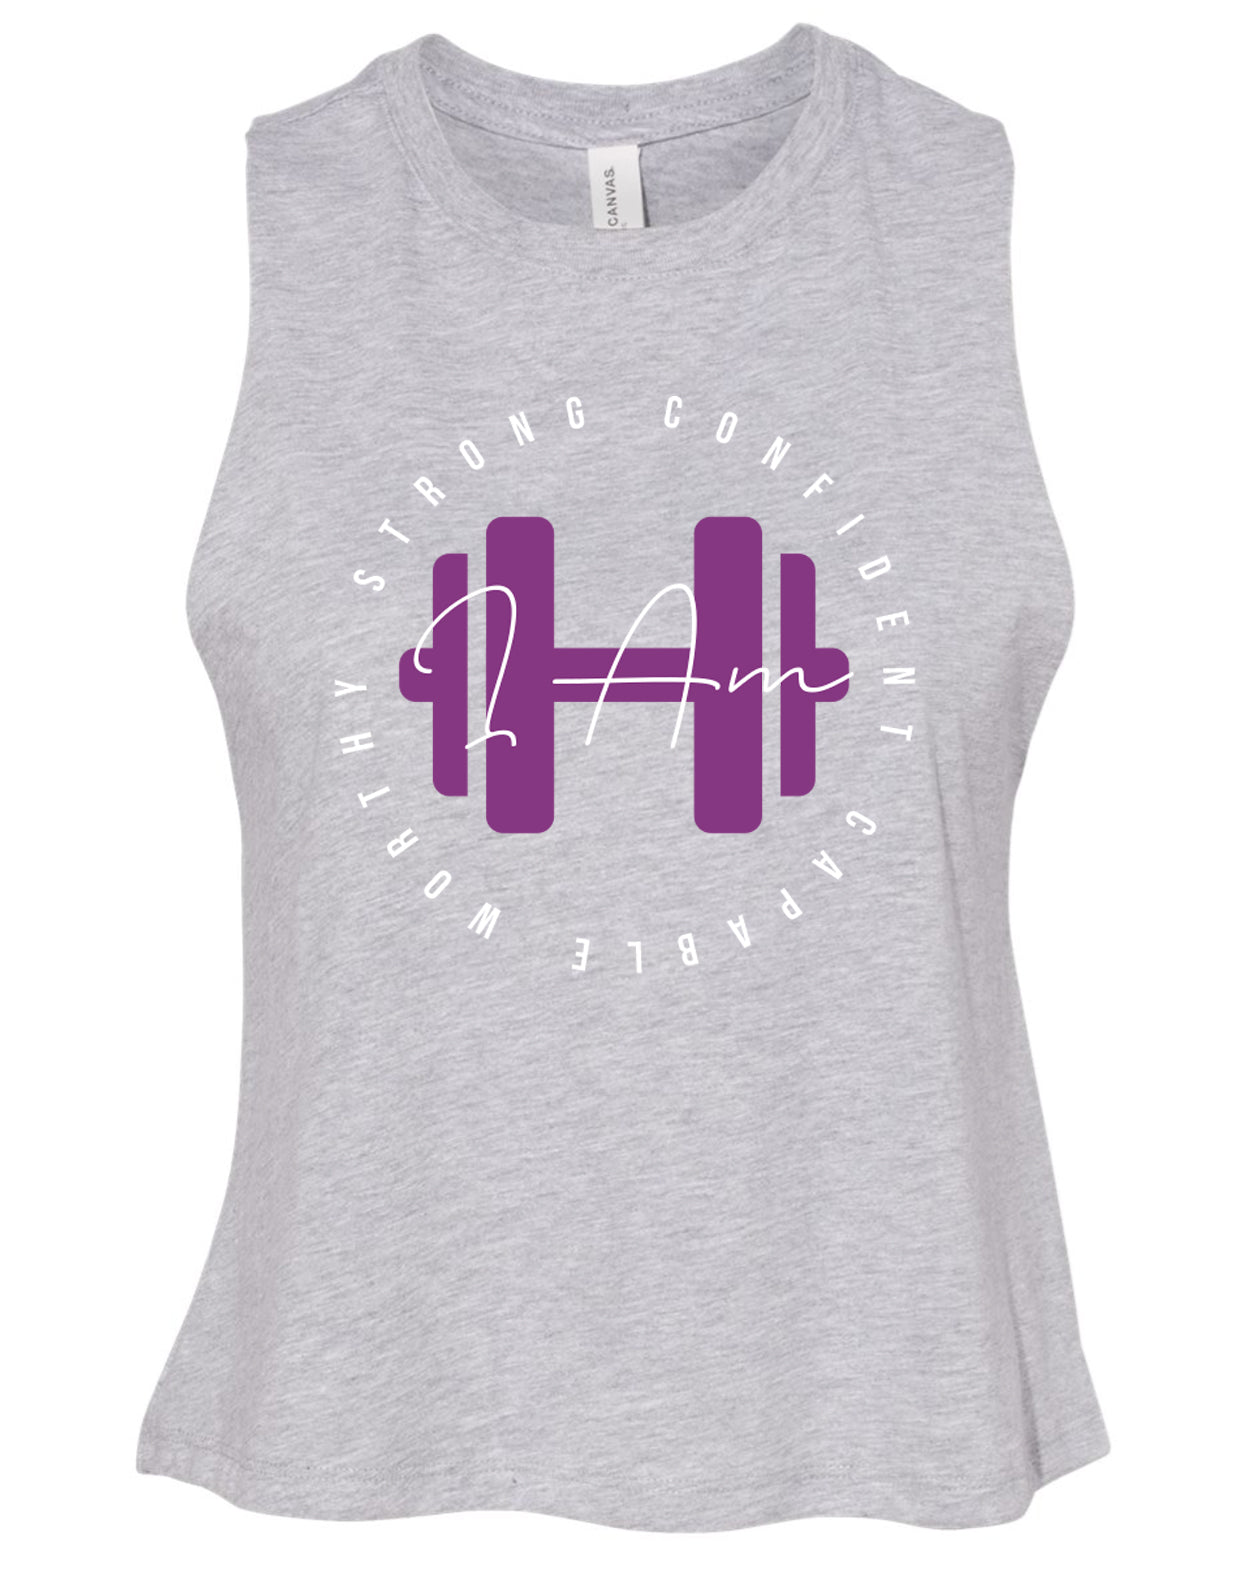 Haines Fitness I AM, Strong, Confident, Capable, Worthy 6682